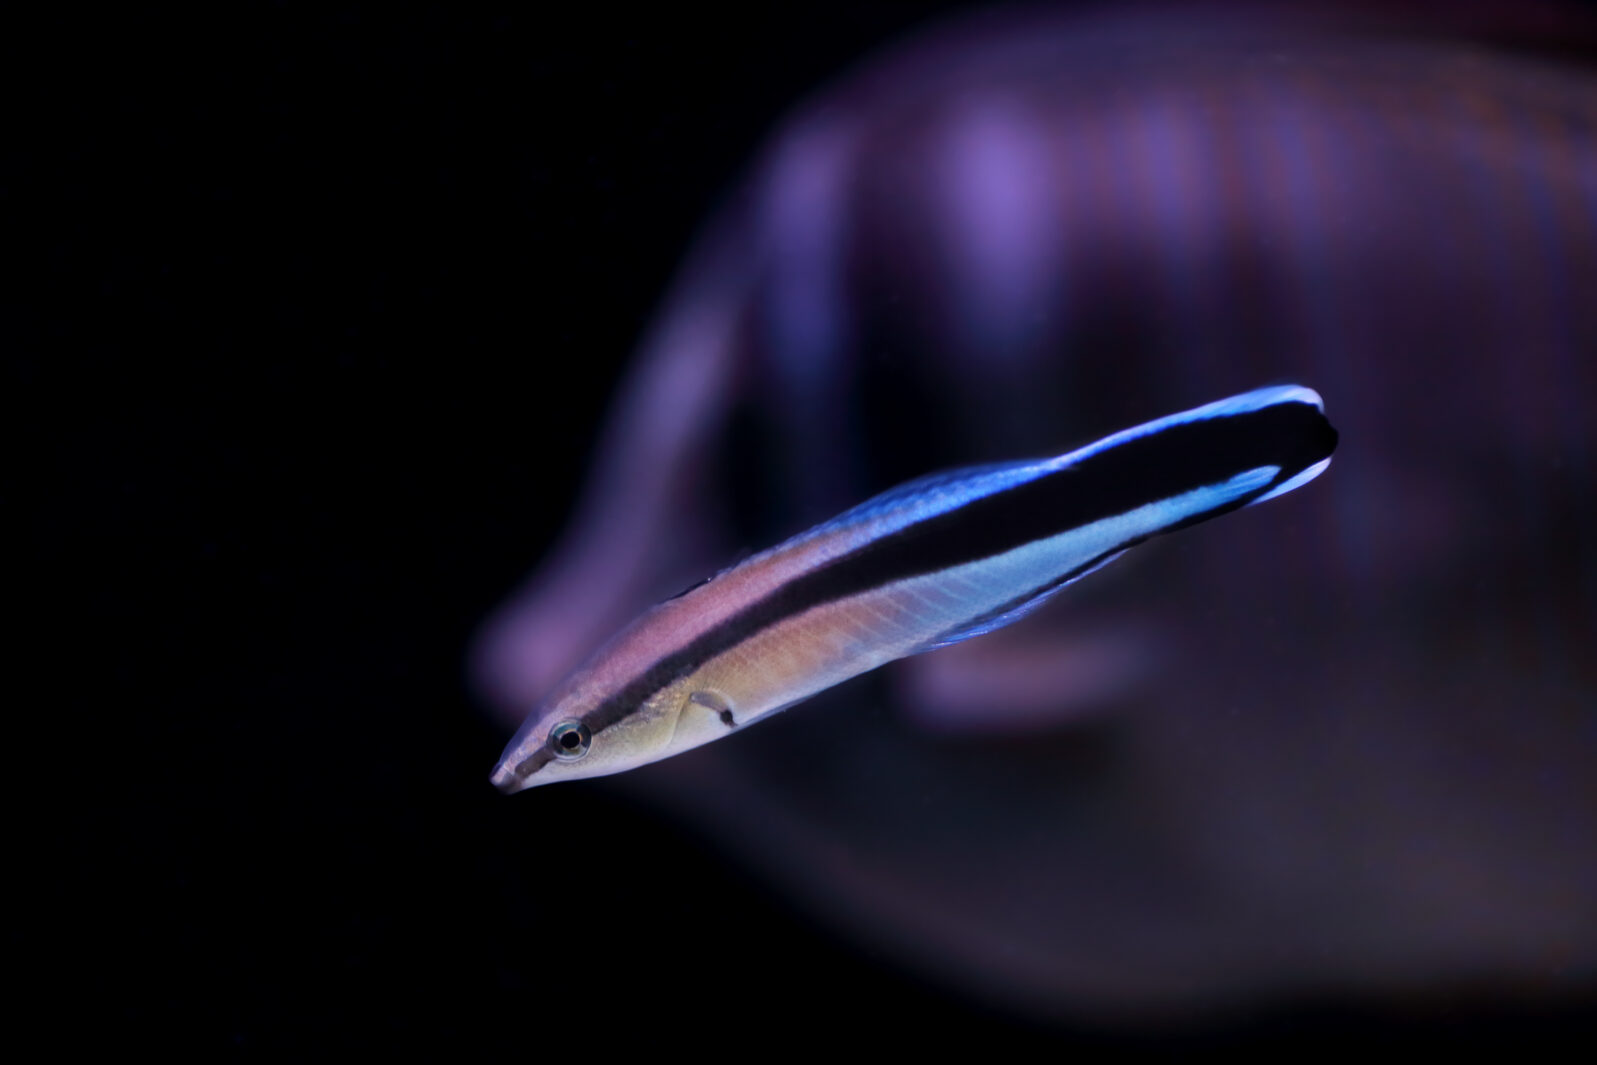 A bluestreak cleaner wrasse, Labroides dimidiatus, on a black background. This small colorful fish can be found on coral reefs Africa, Red Sea and Polynesia